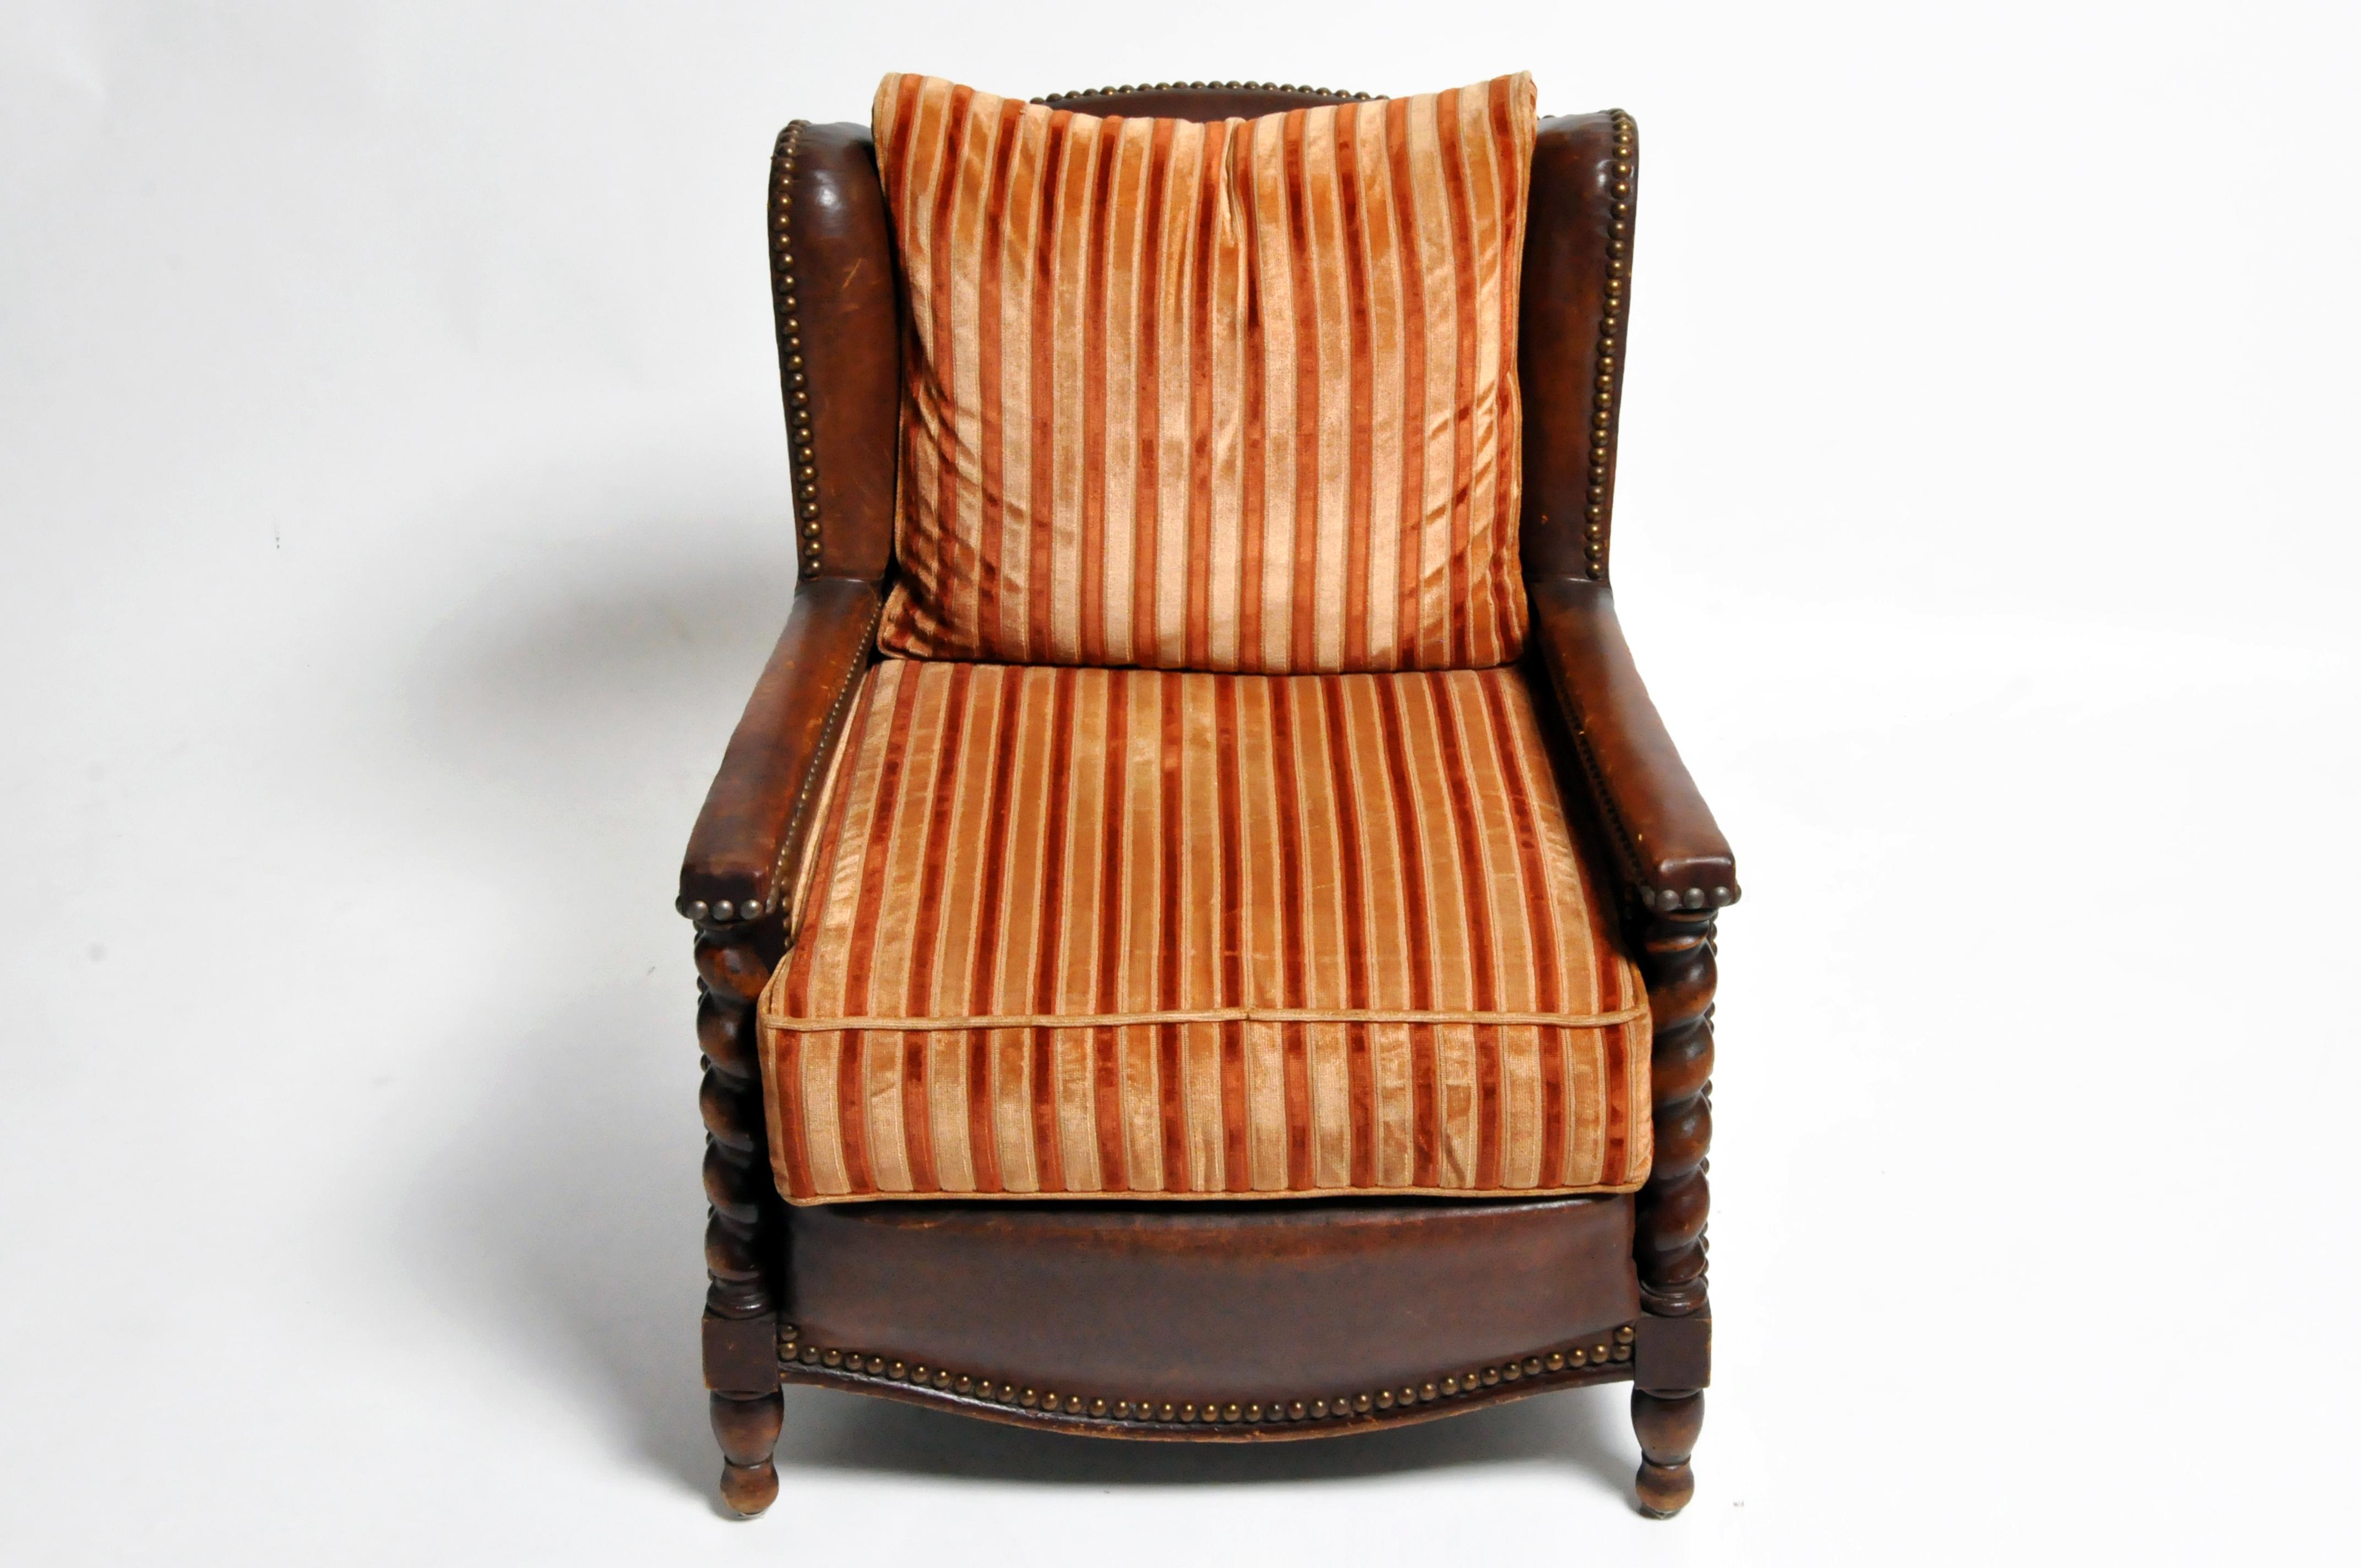 Pair of French leather club chairs, made circa 1930s this pair features a beautifully aged patina on the leather and hand carved wood work. The original leather seat cushions have been replaced with velvet upholstery which can be changed according